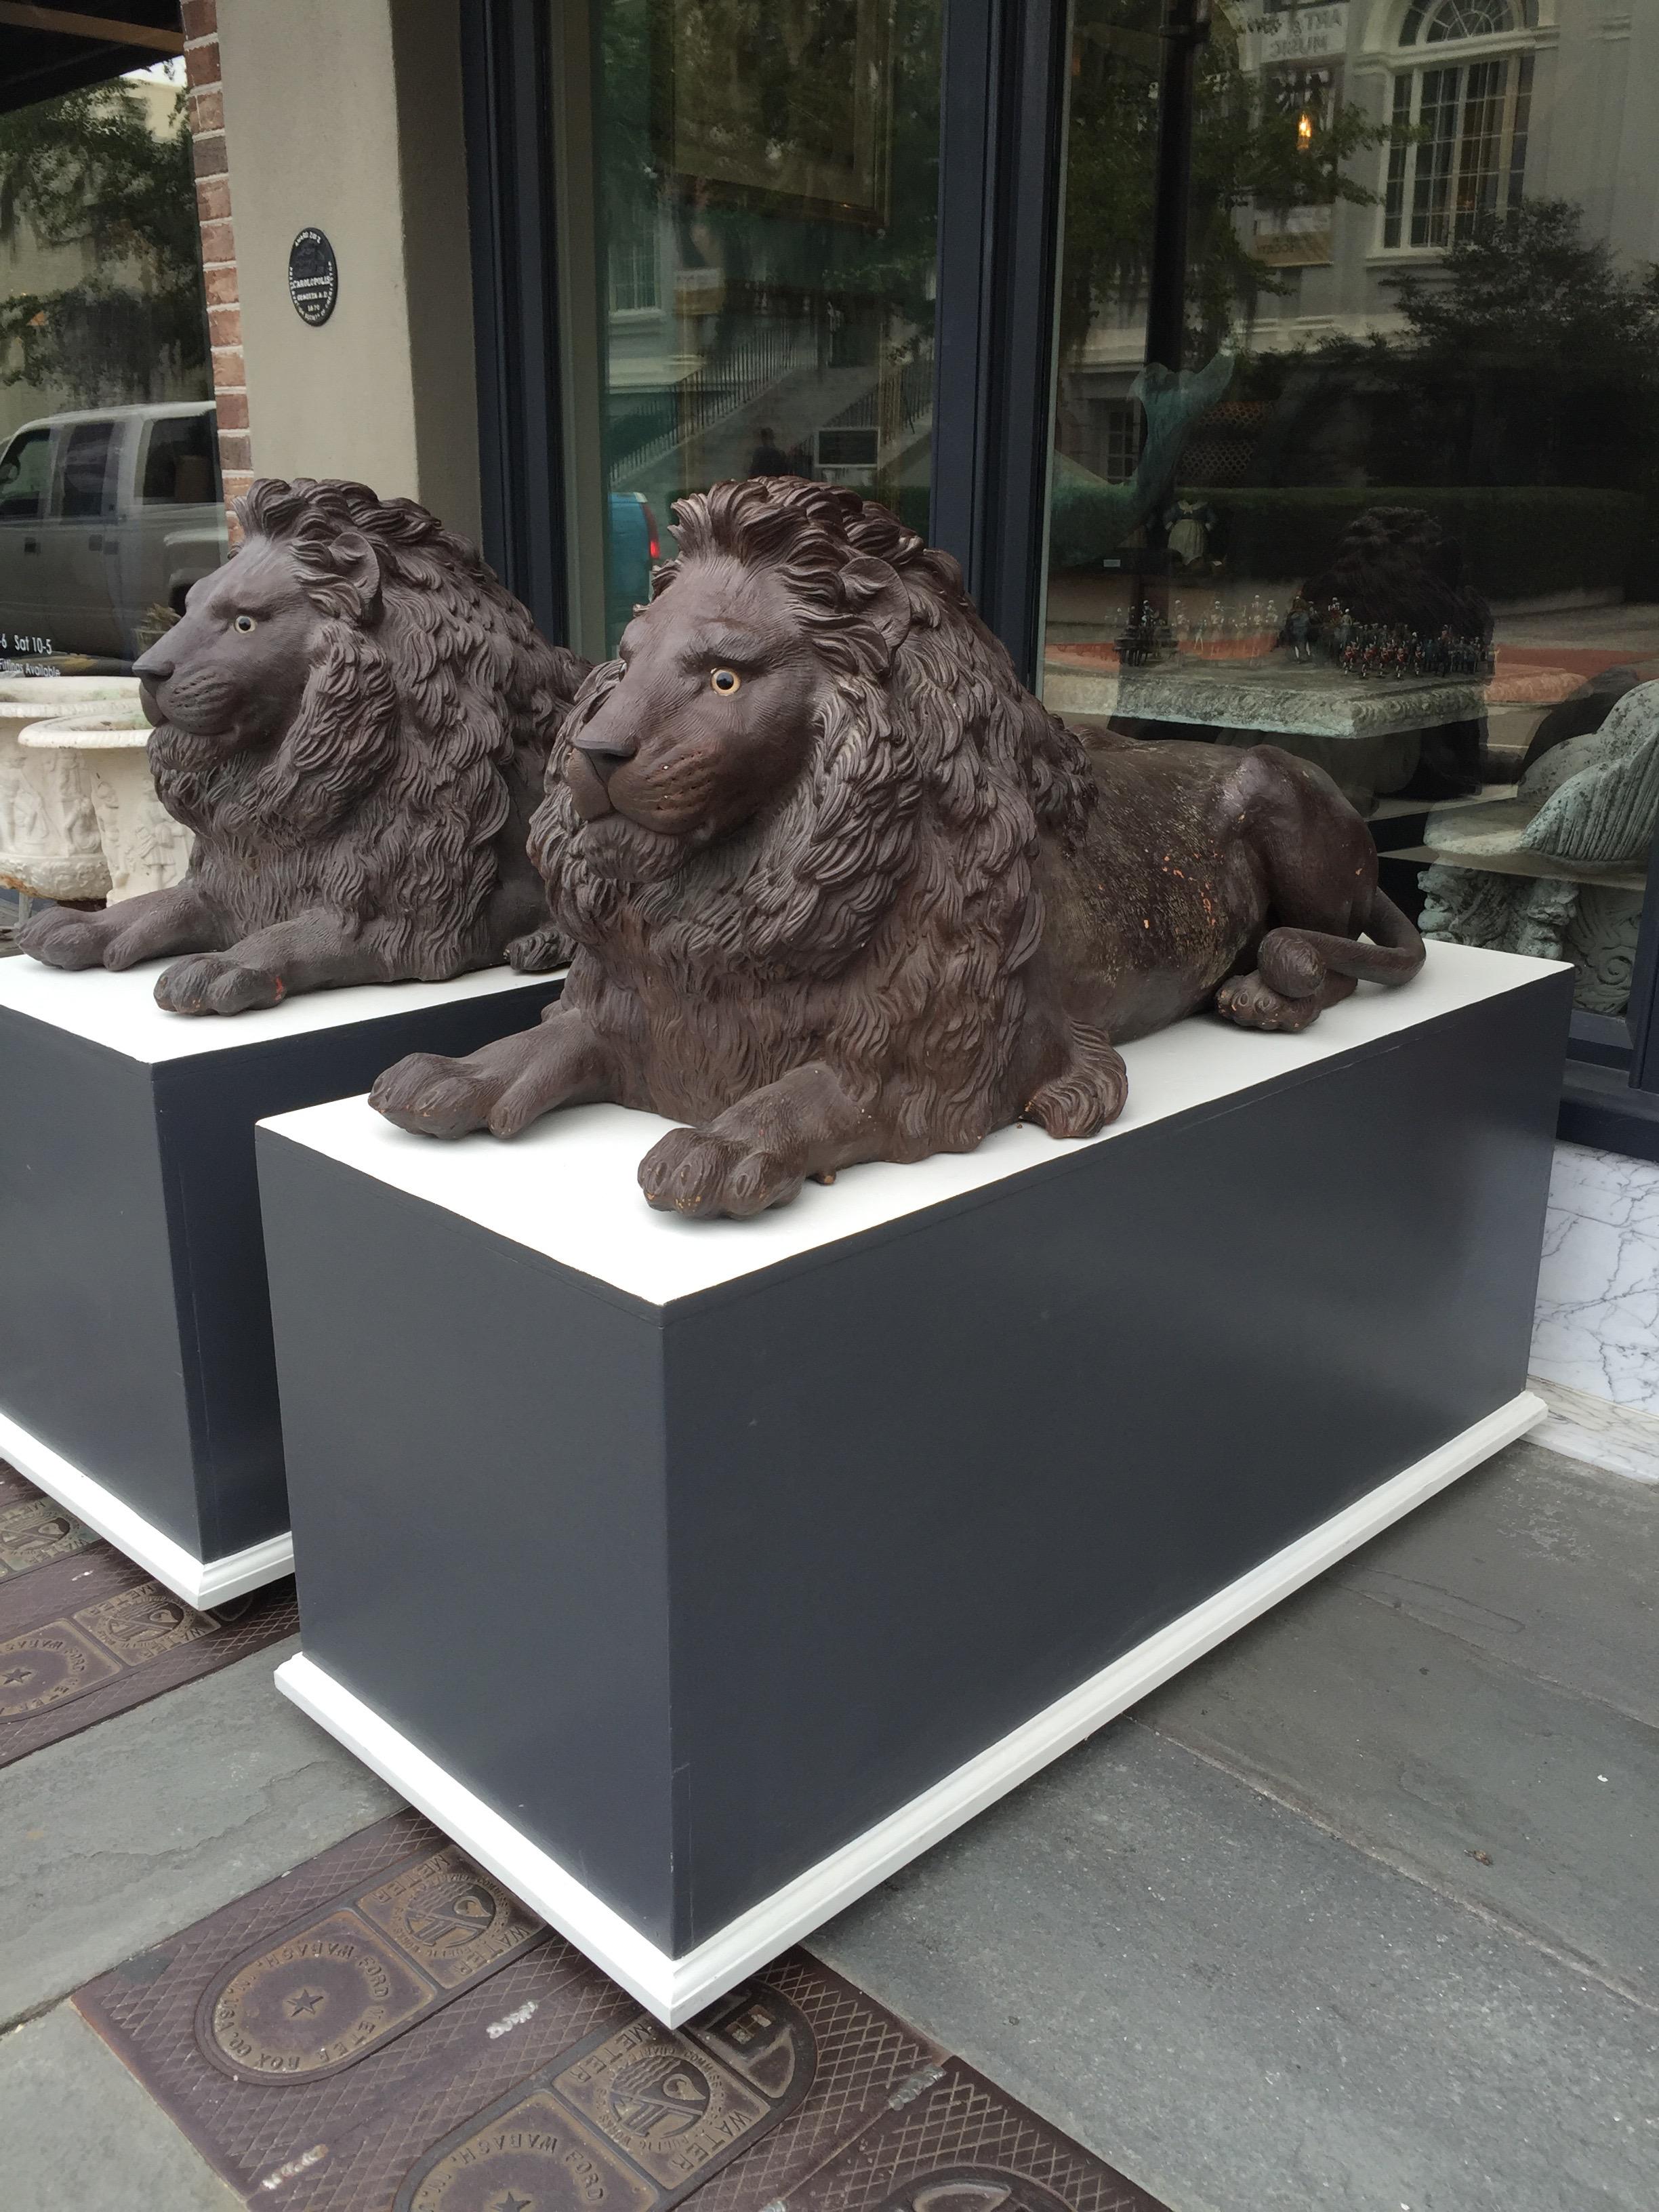 Pair of late 19th century terracotta lions in resting pose. Originally had full sets of whiskers that are mostly gone but remnants still remain. Glass eyes and vigilant faces provide a very imposing but charming look.  